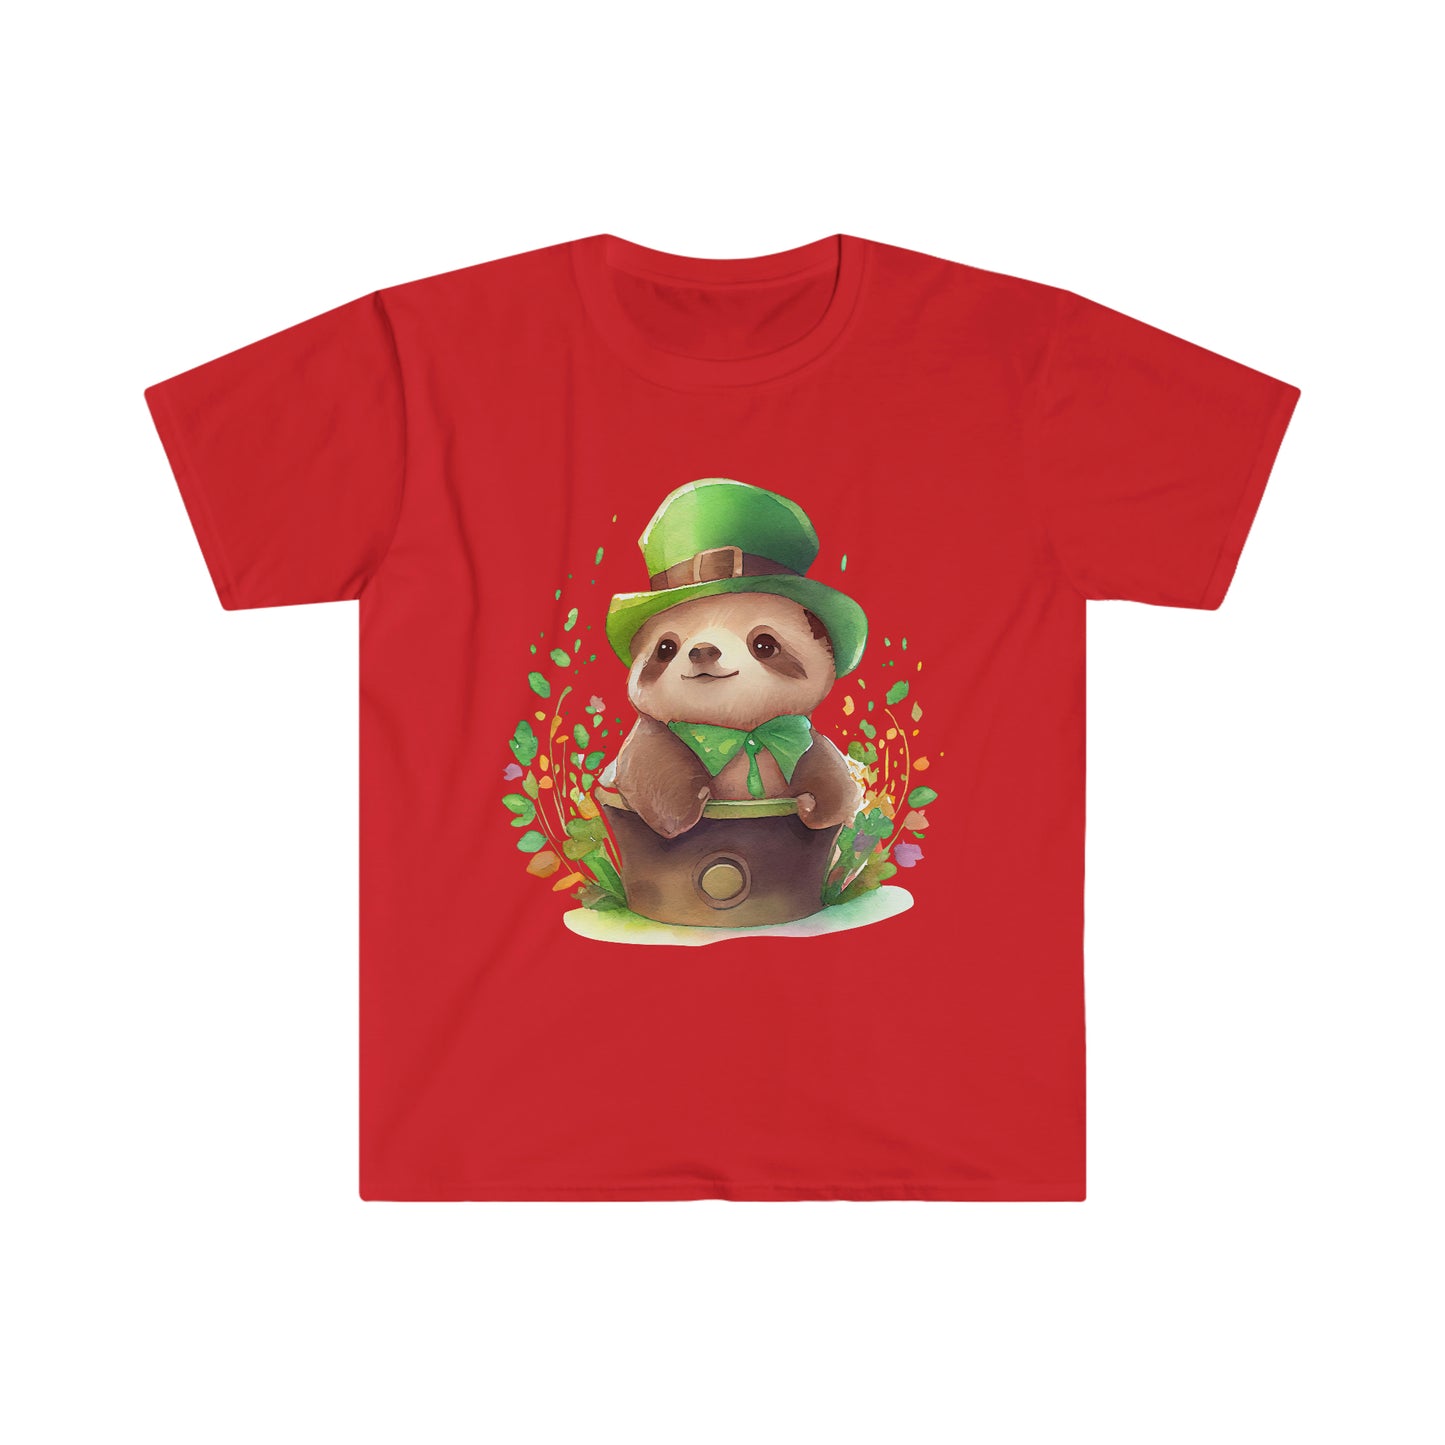 "Cute St. Patrick's Day Sloth" Essential Comfort Tee